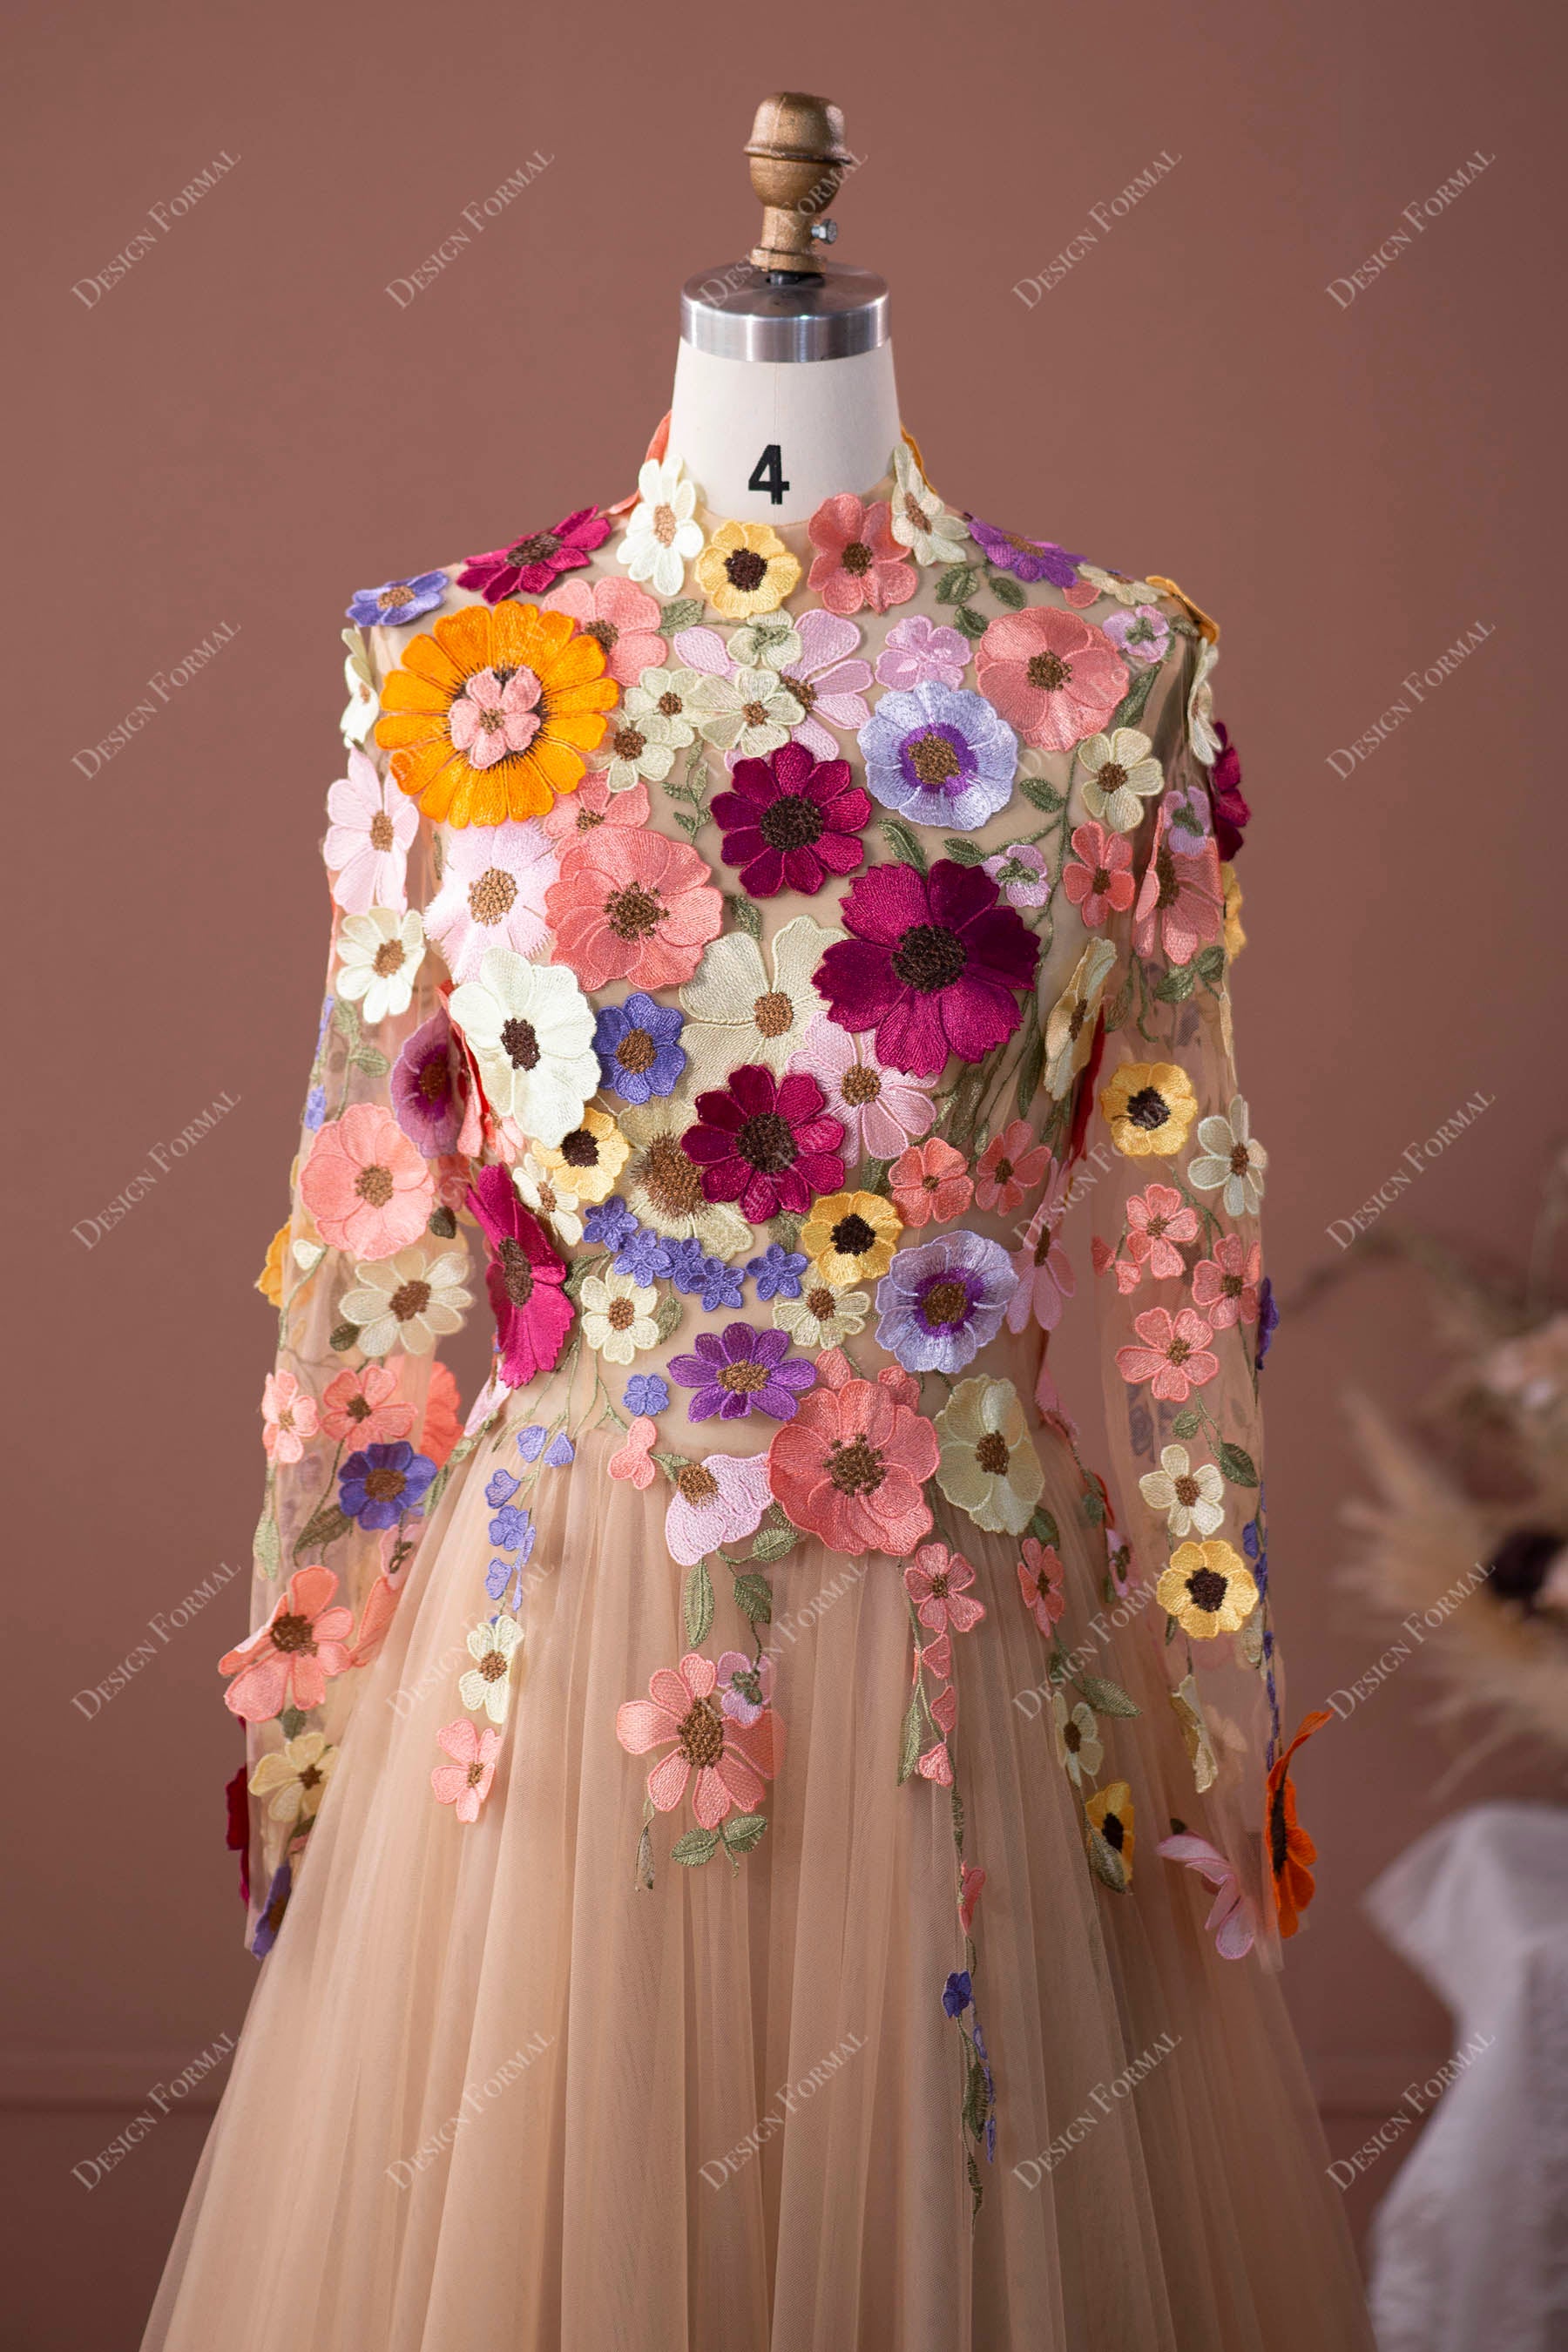 colorful wild flowers fall wedding gown